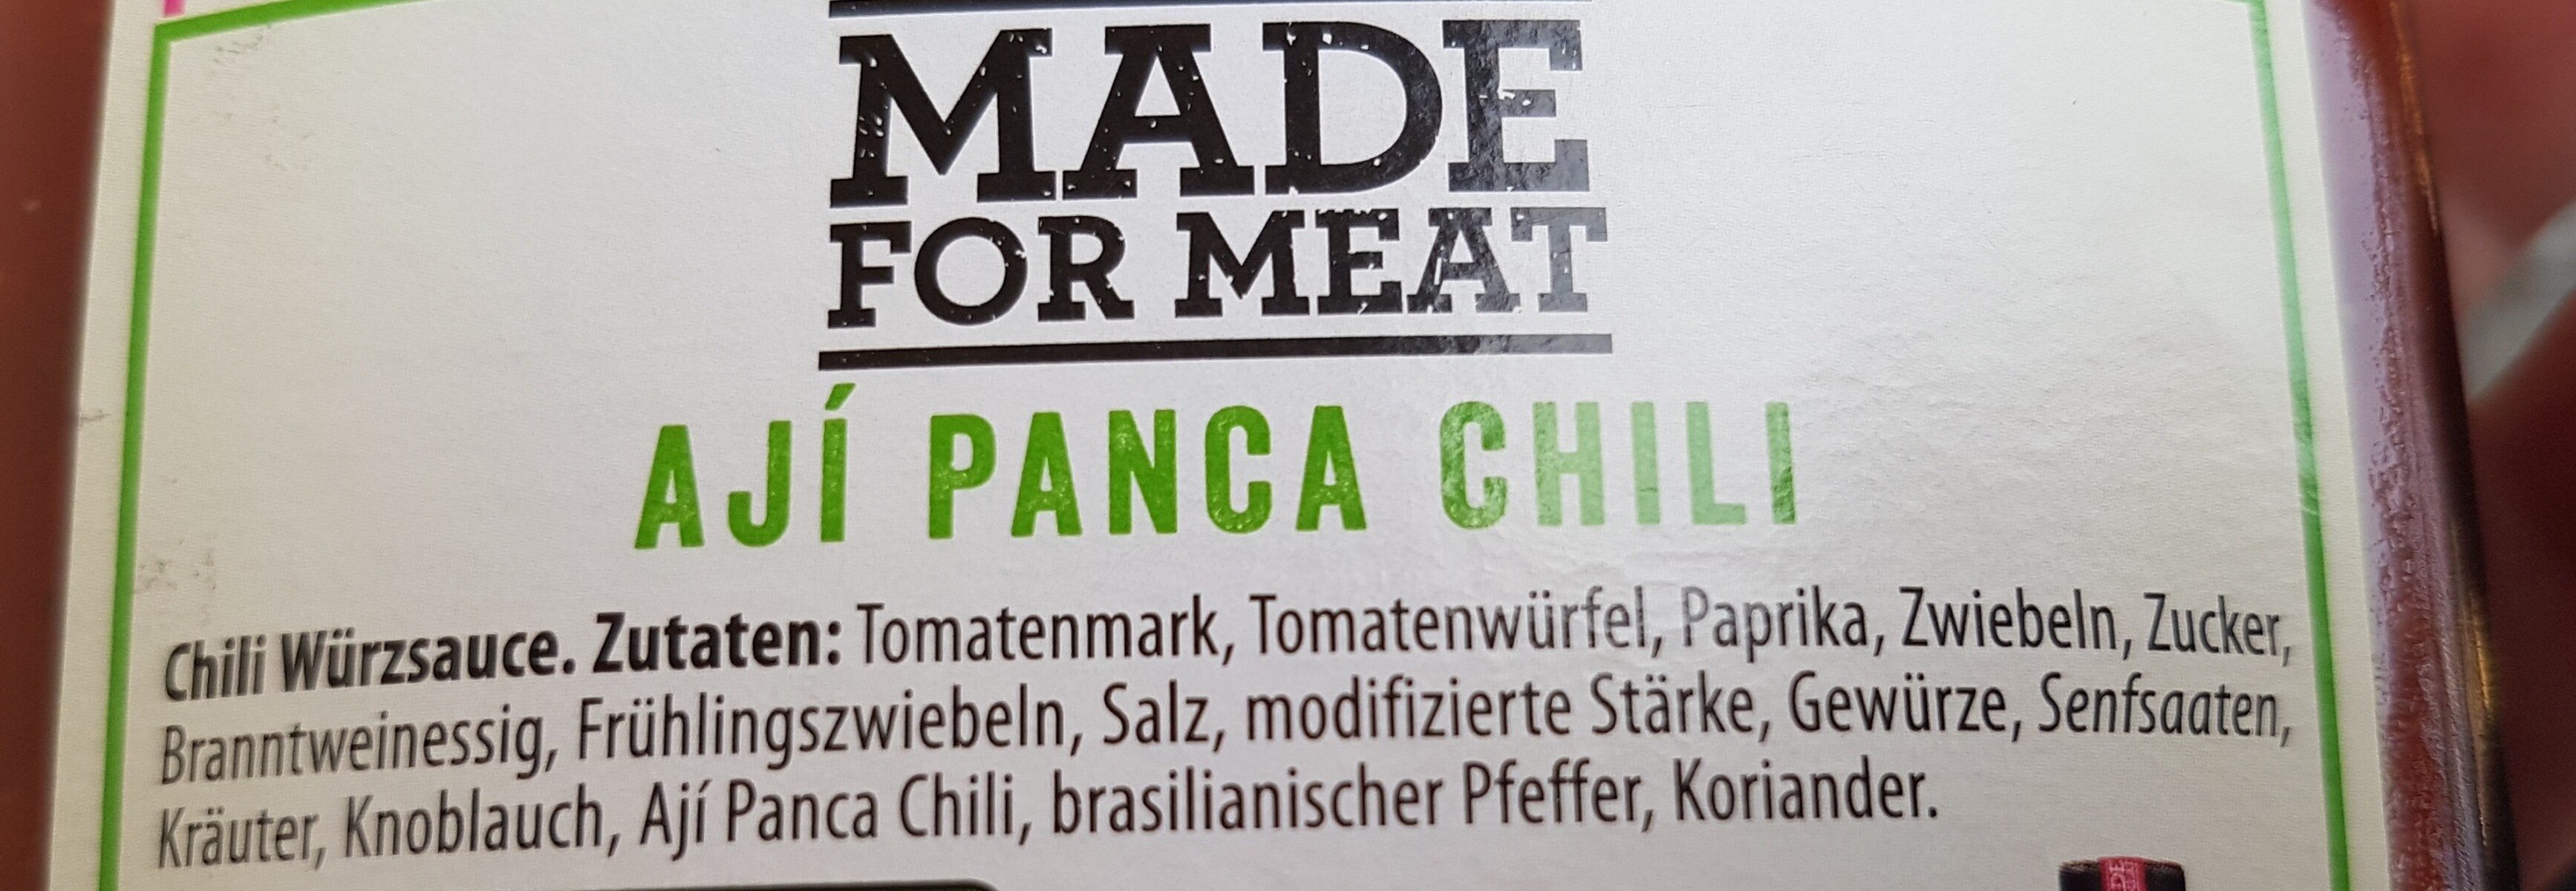 Kühne Made for Meat - MADE FOR MEAT CHILI AJÍ PANCA 375ml. 1.99€ - Zutaten